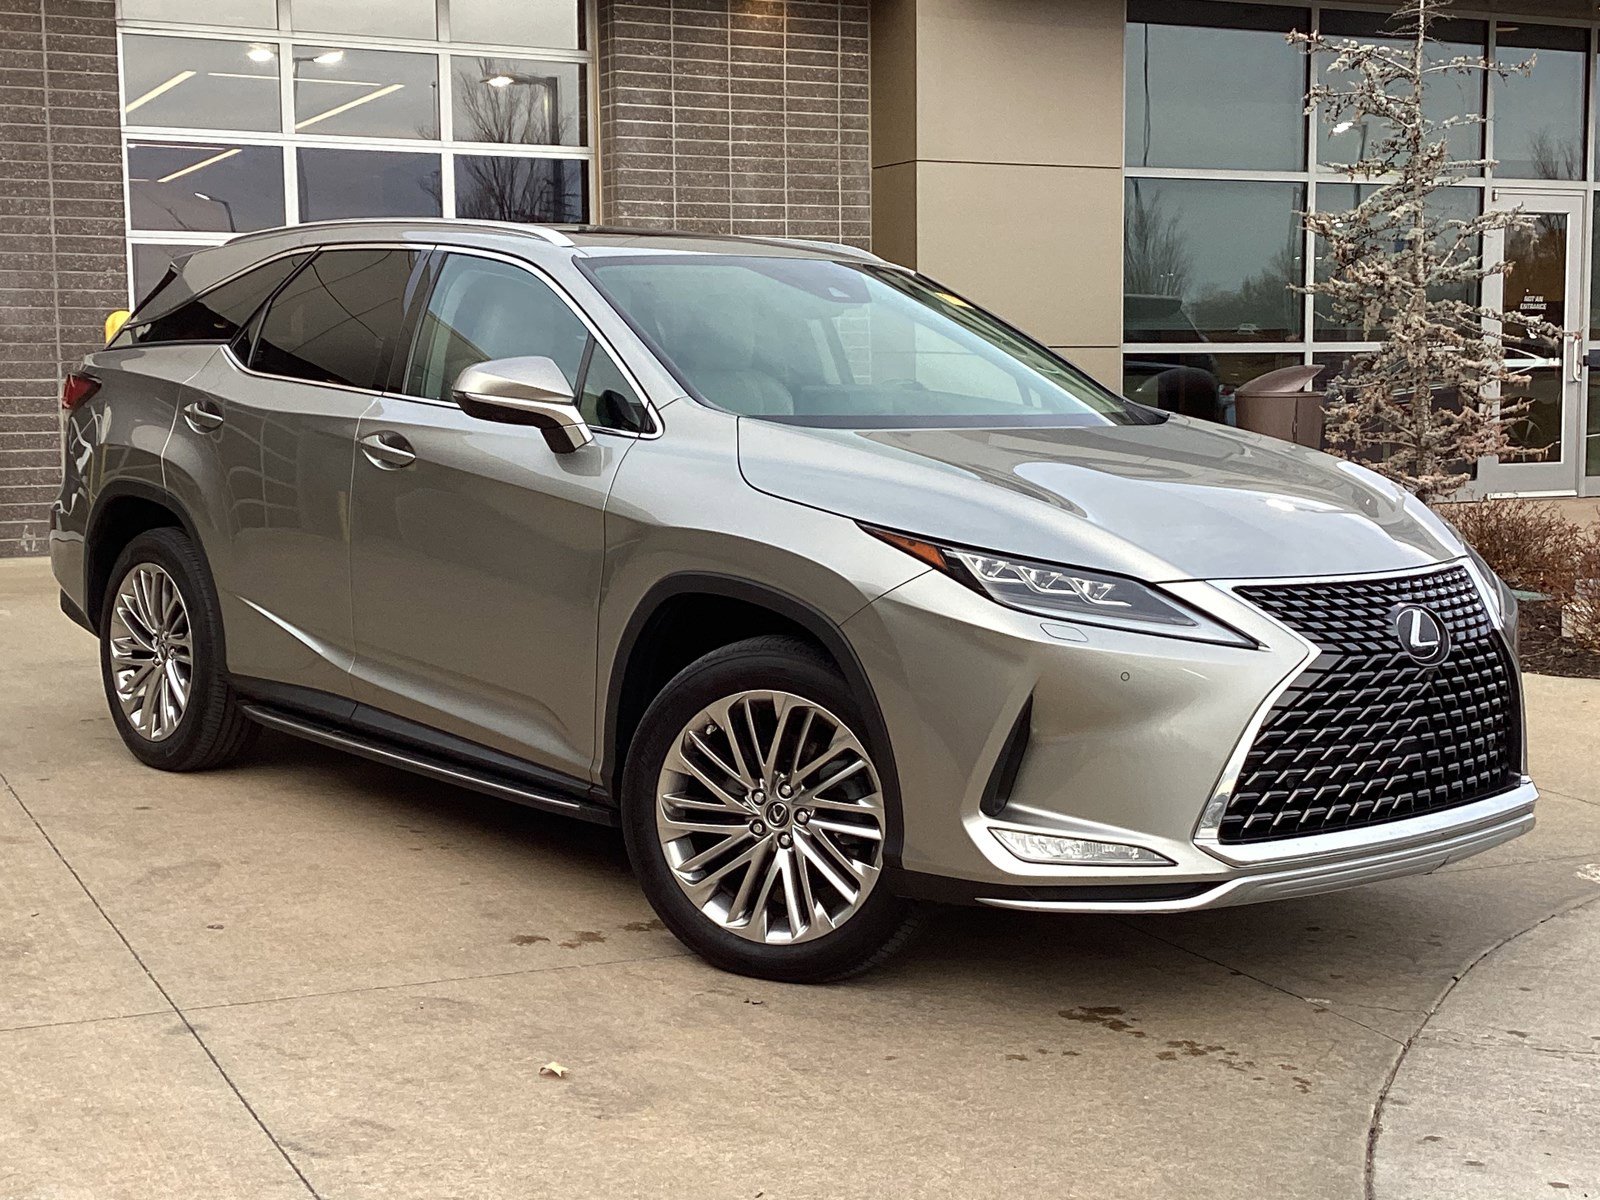 Pre-Owned 2020 Lexus RX 350L Luxury SUV in Cary #P24416 | Hendrick Dodge  Cary